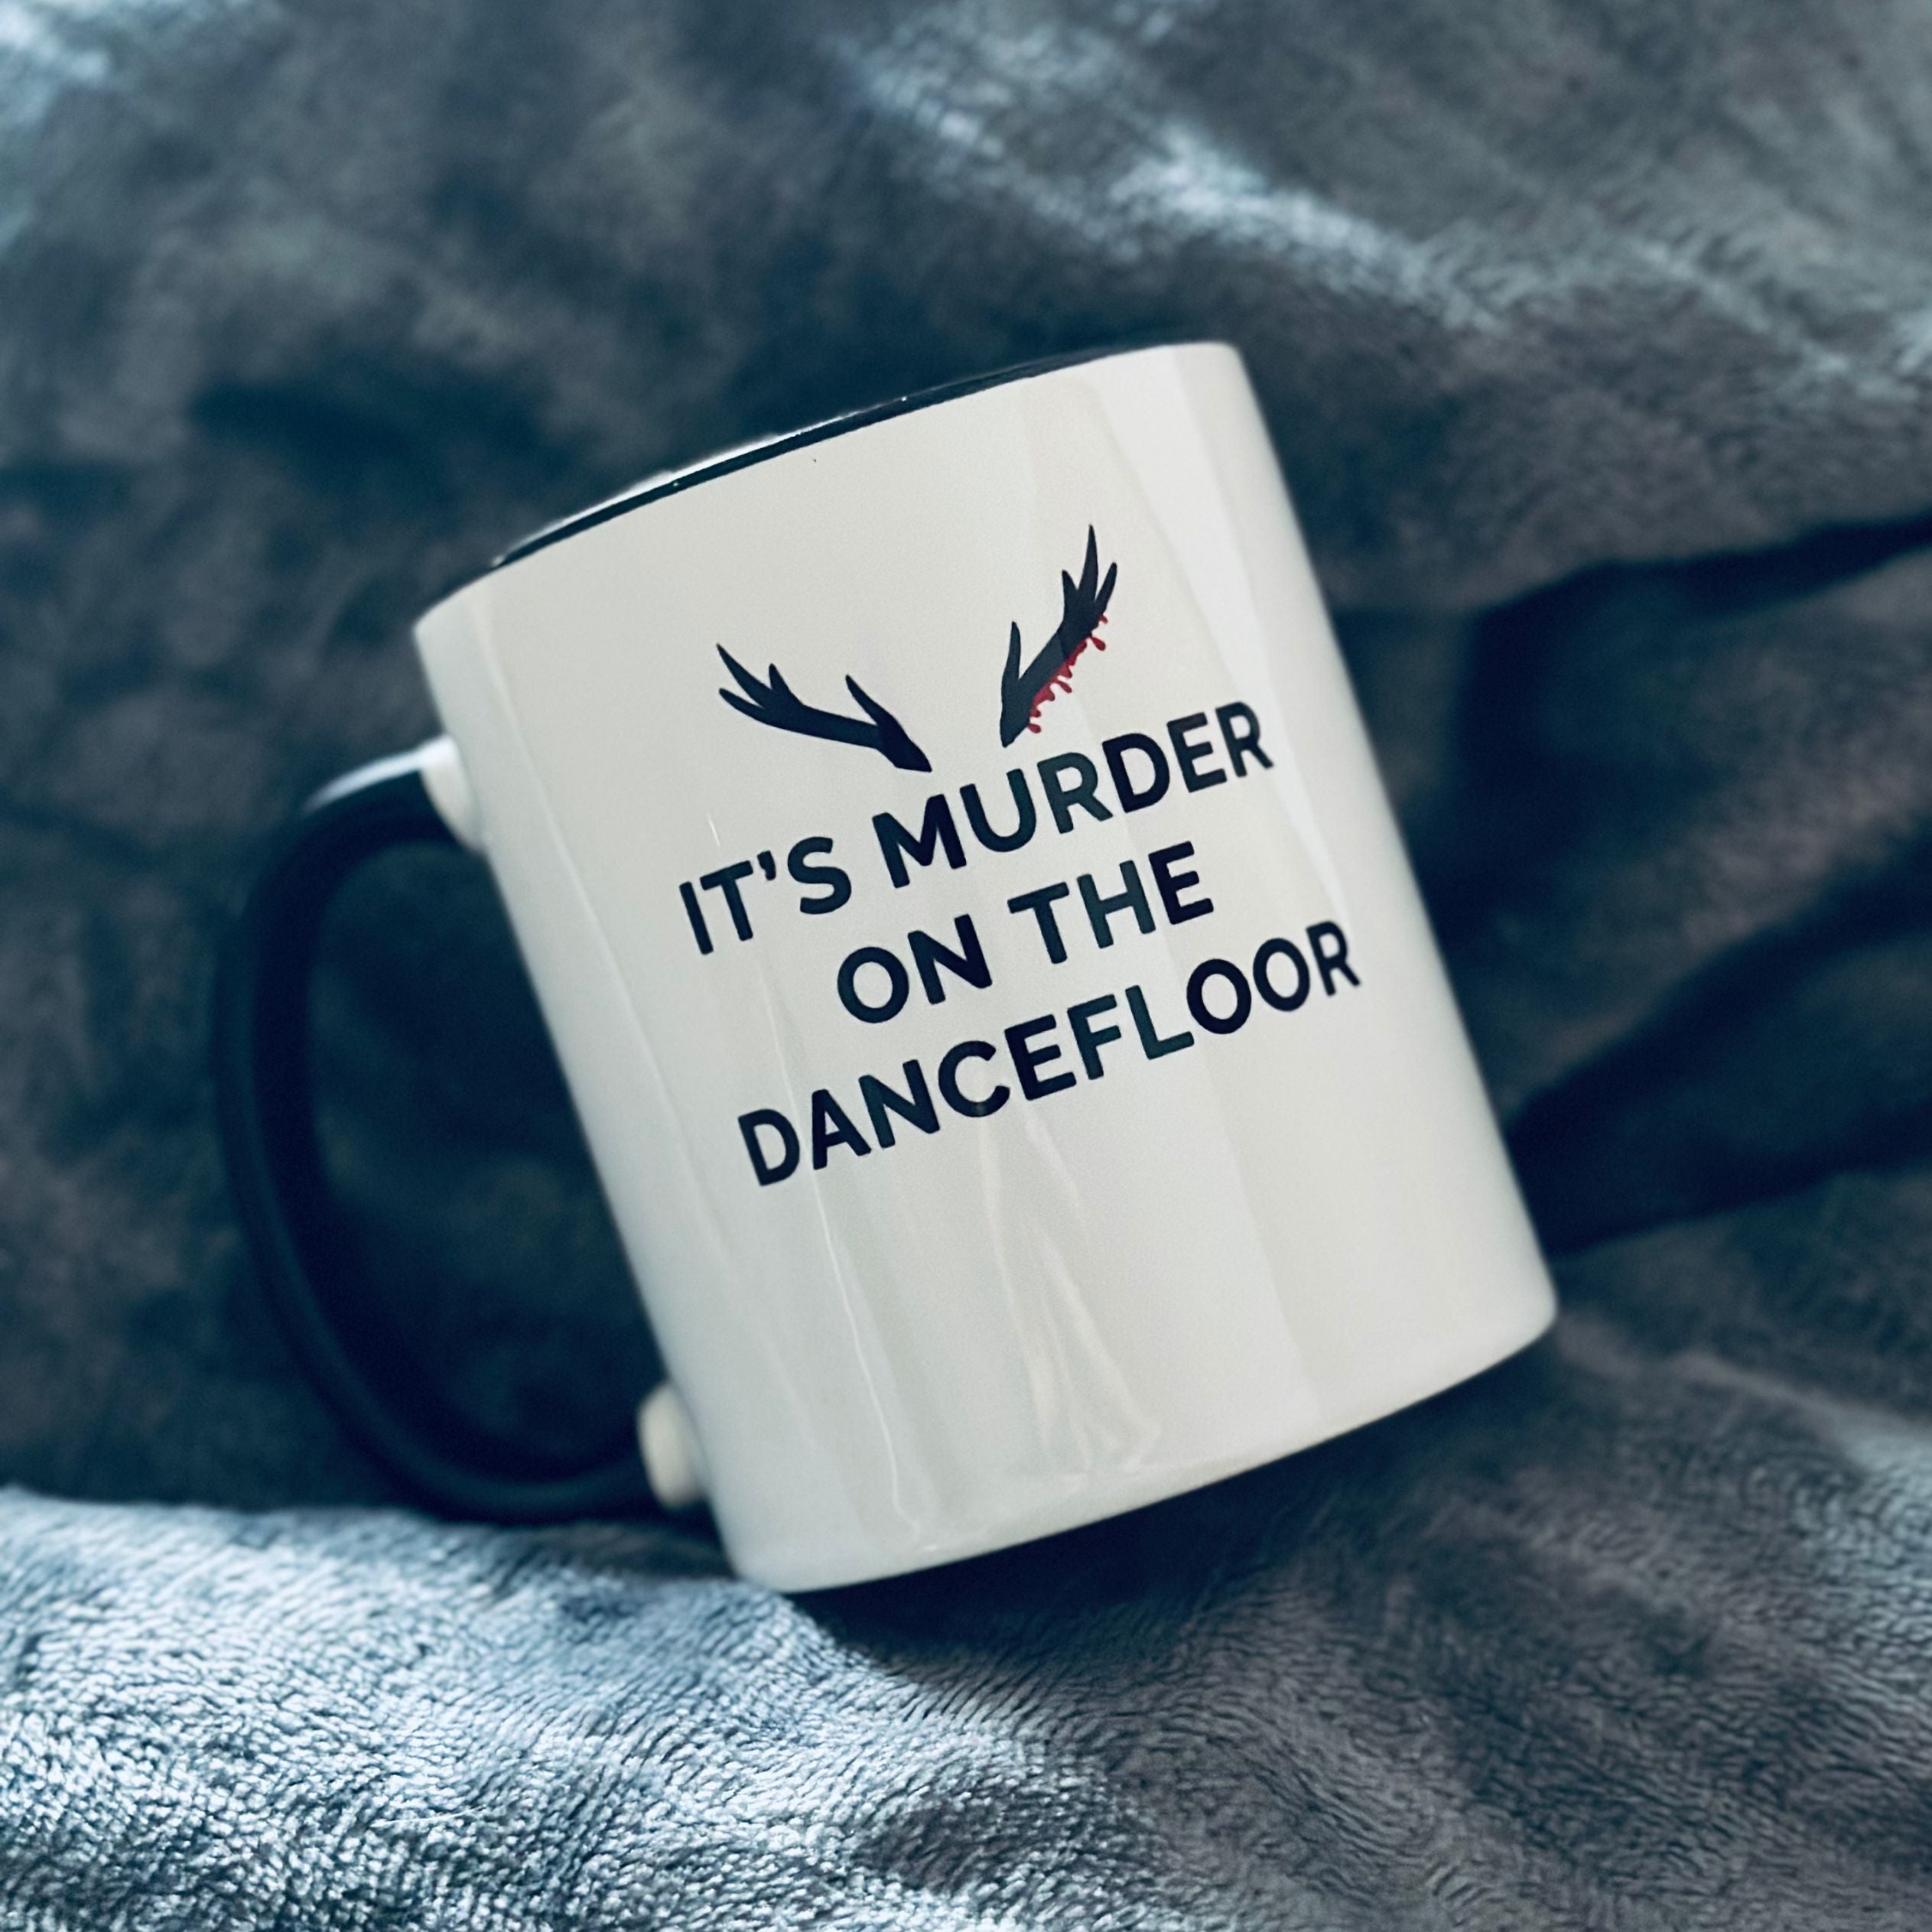 Mug with a black handle and black inner that reads "It's Murder On The Dancefloor" with antlers above the text with blood drips coming from the right bottom antler